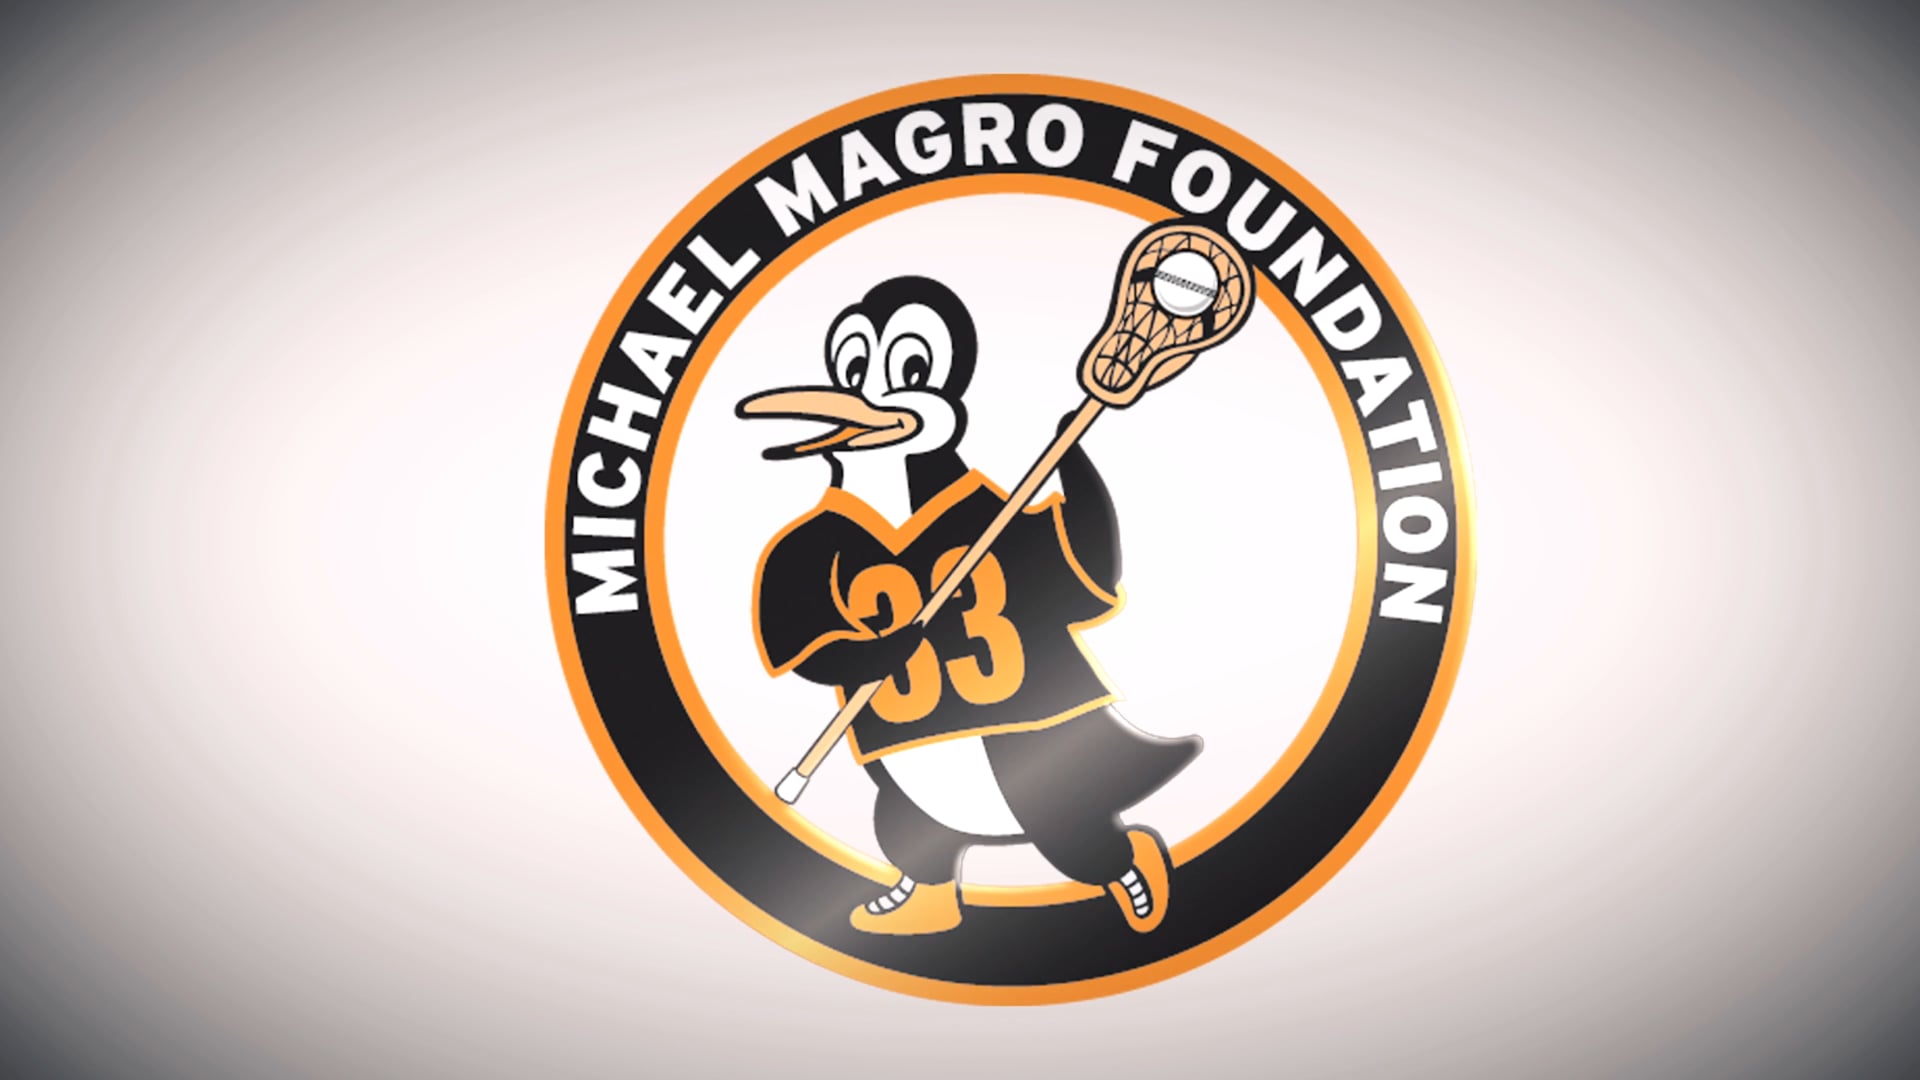 MICHAEL MAGRO FOUNDATION COMMERCIAL